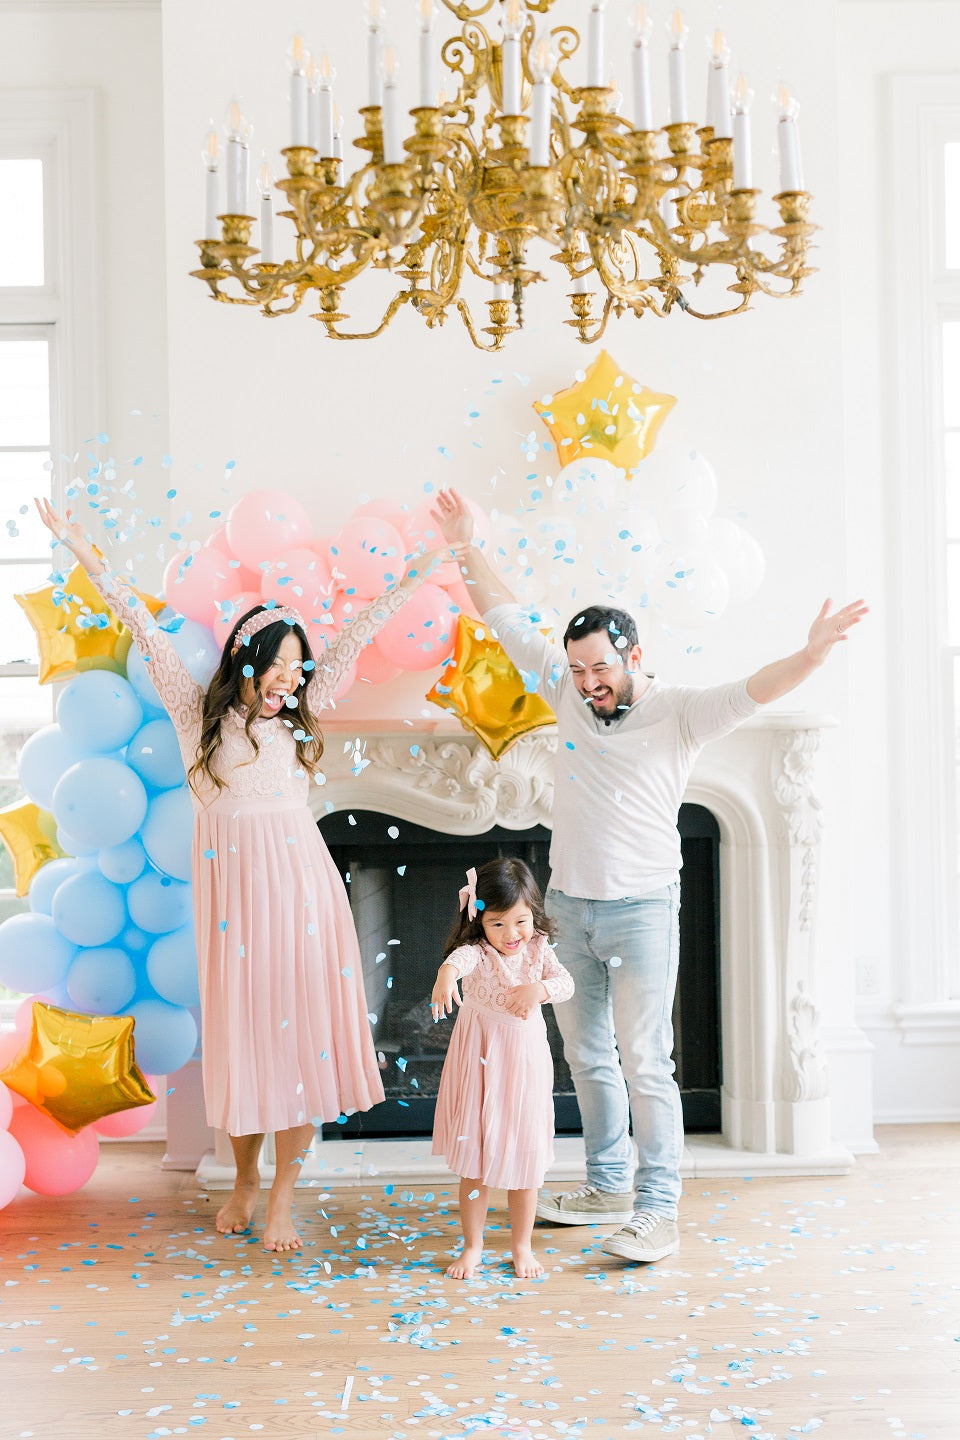 Oh Baby Giant Balloon With Tassel Tail Blue Pink Boy Girl Statement Party  Decoration Shower Gender Pregnancy Reveal Photo Prop - Yahoo Shopping